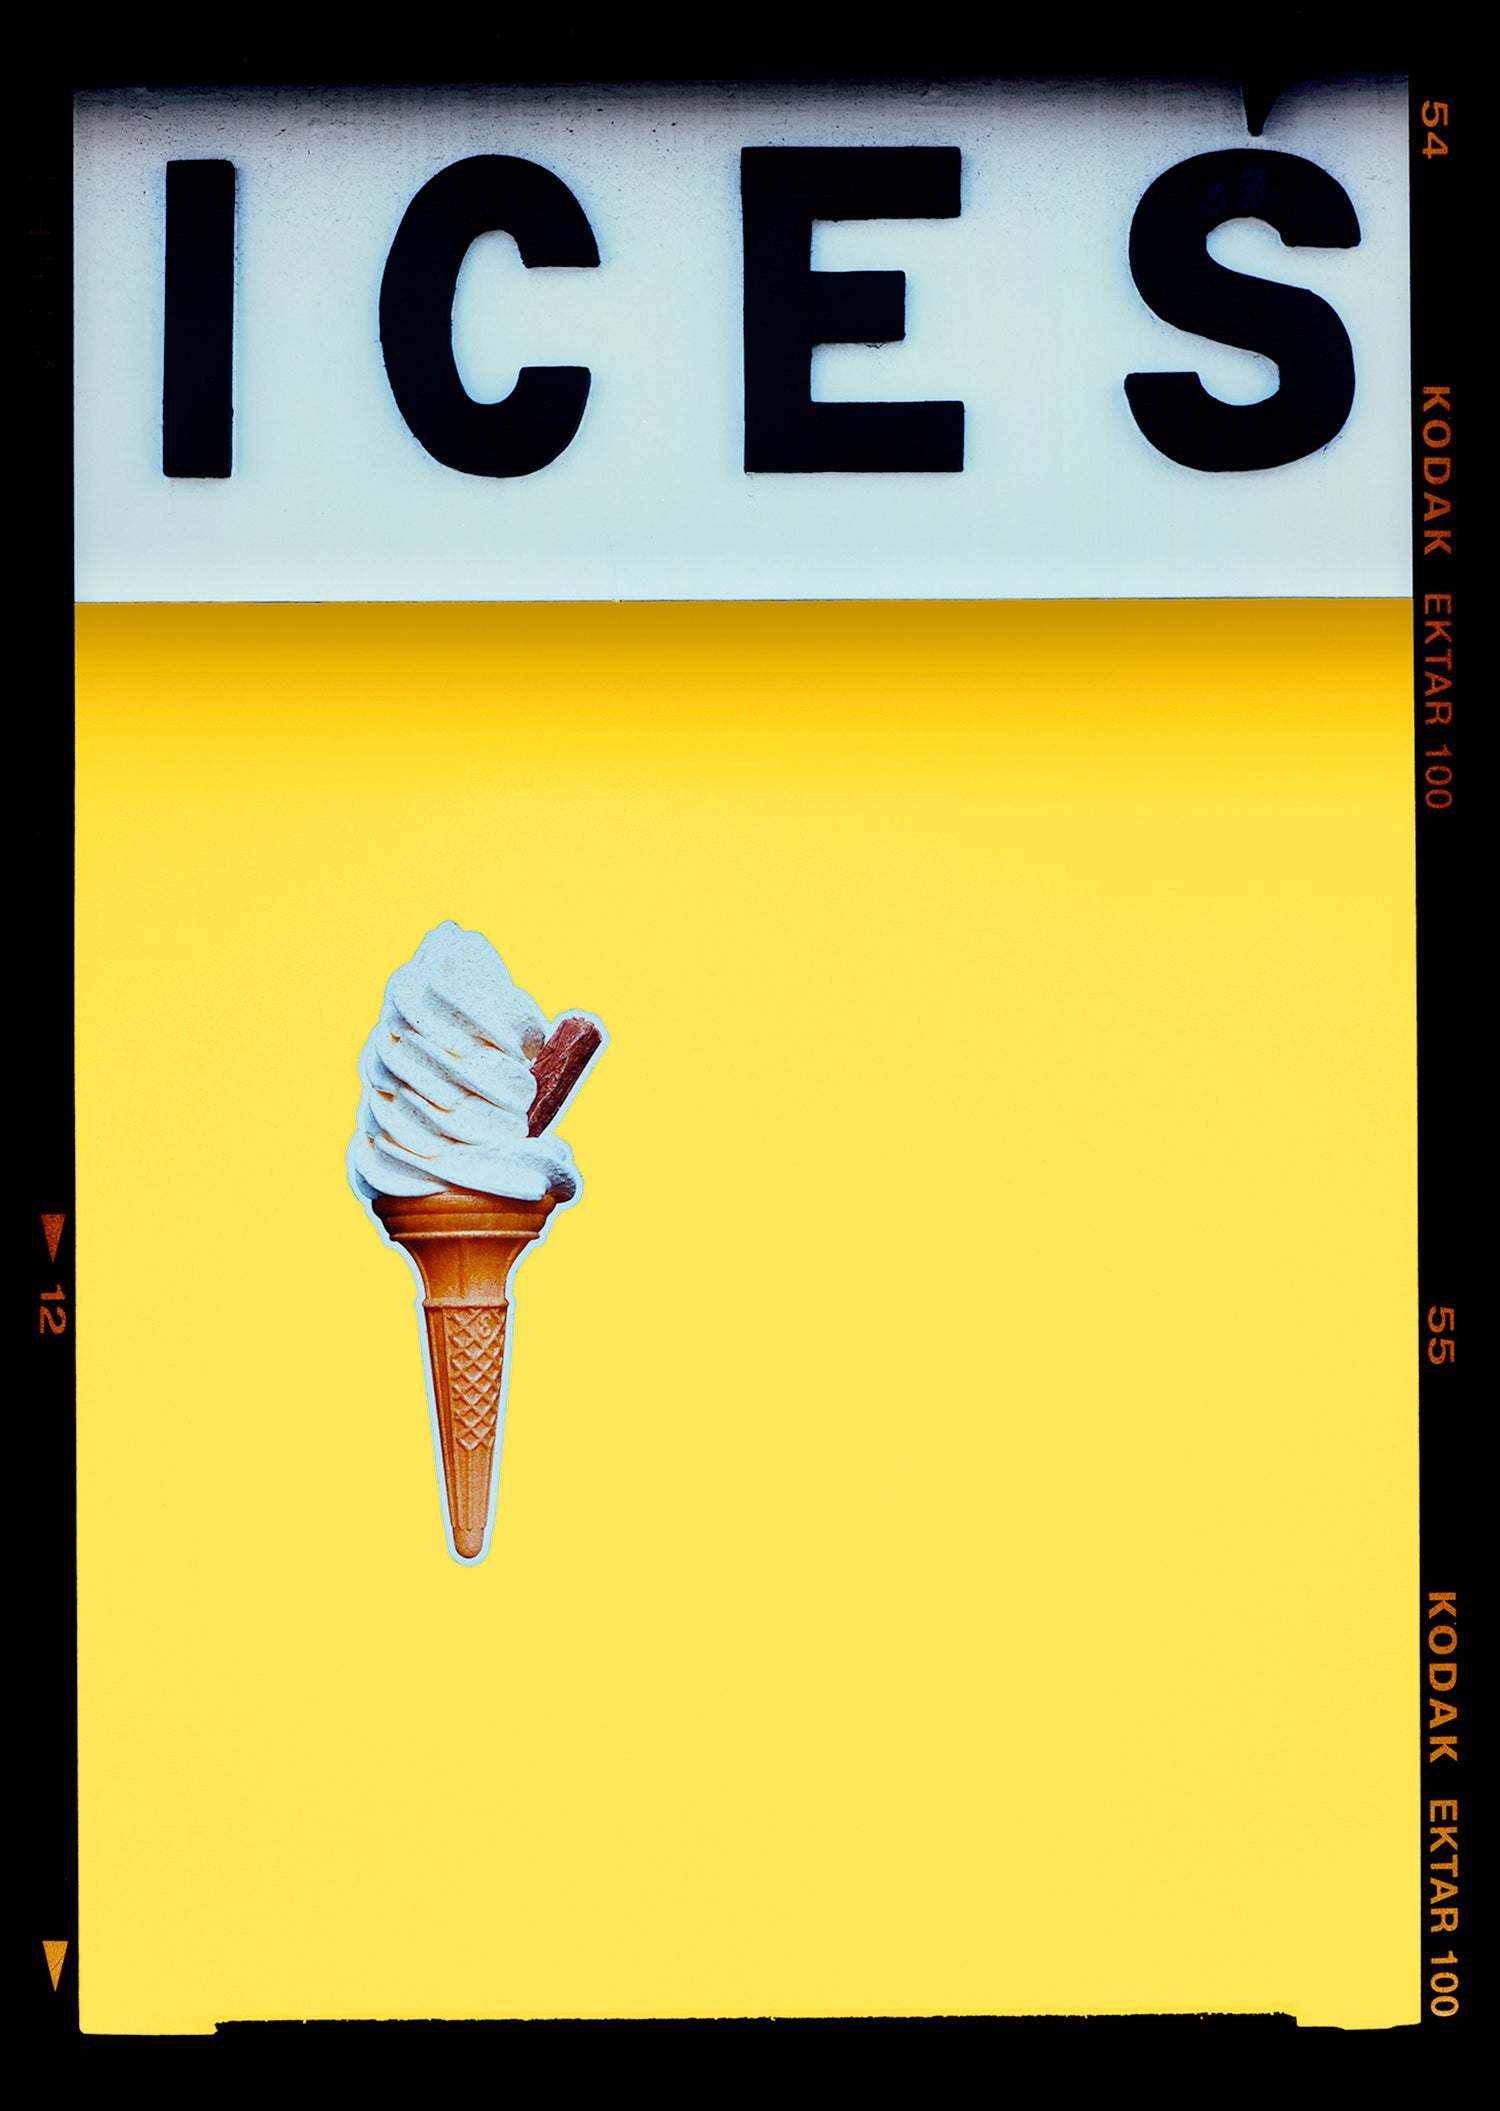 Photograph by Richard Heeps.  At the top black letters spell out ICES and below is depicted a 99 icecream cone sitting left of centre against a sherbet yellow coloured background.  